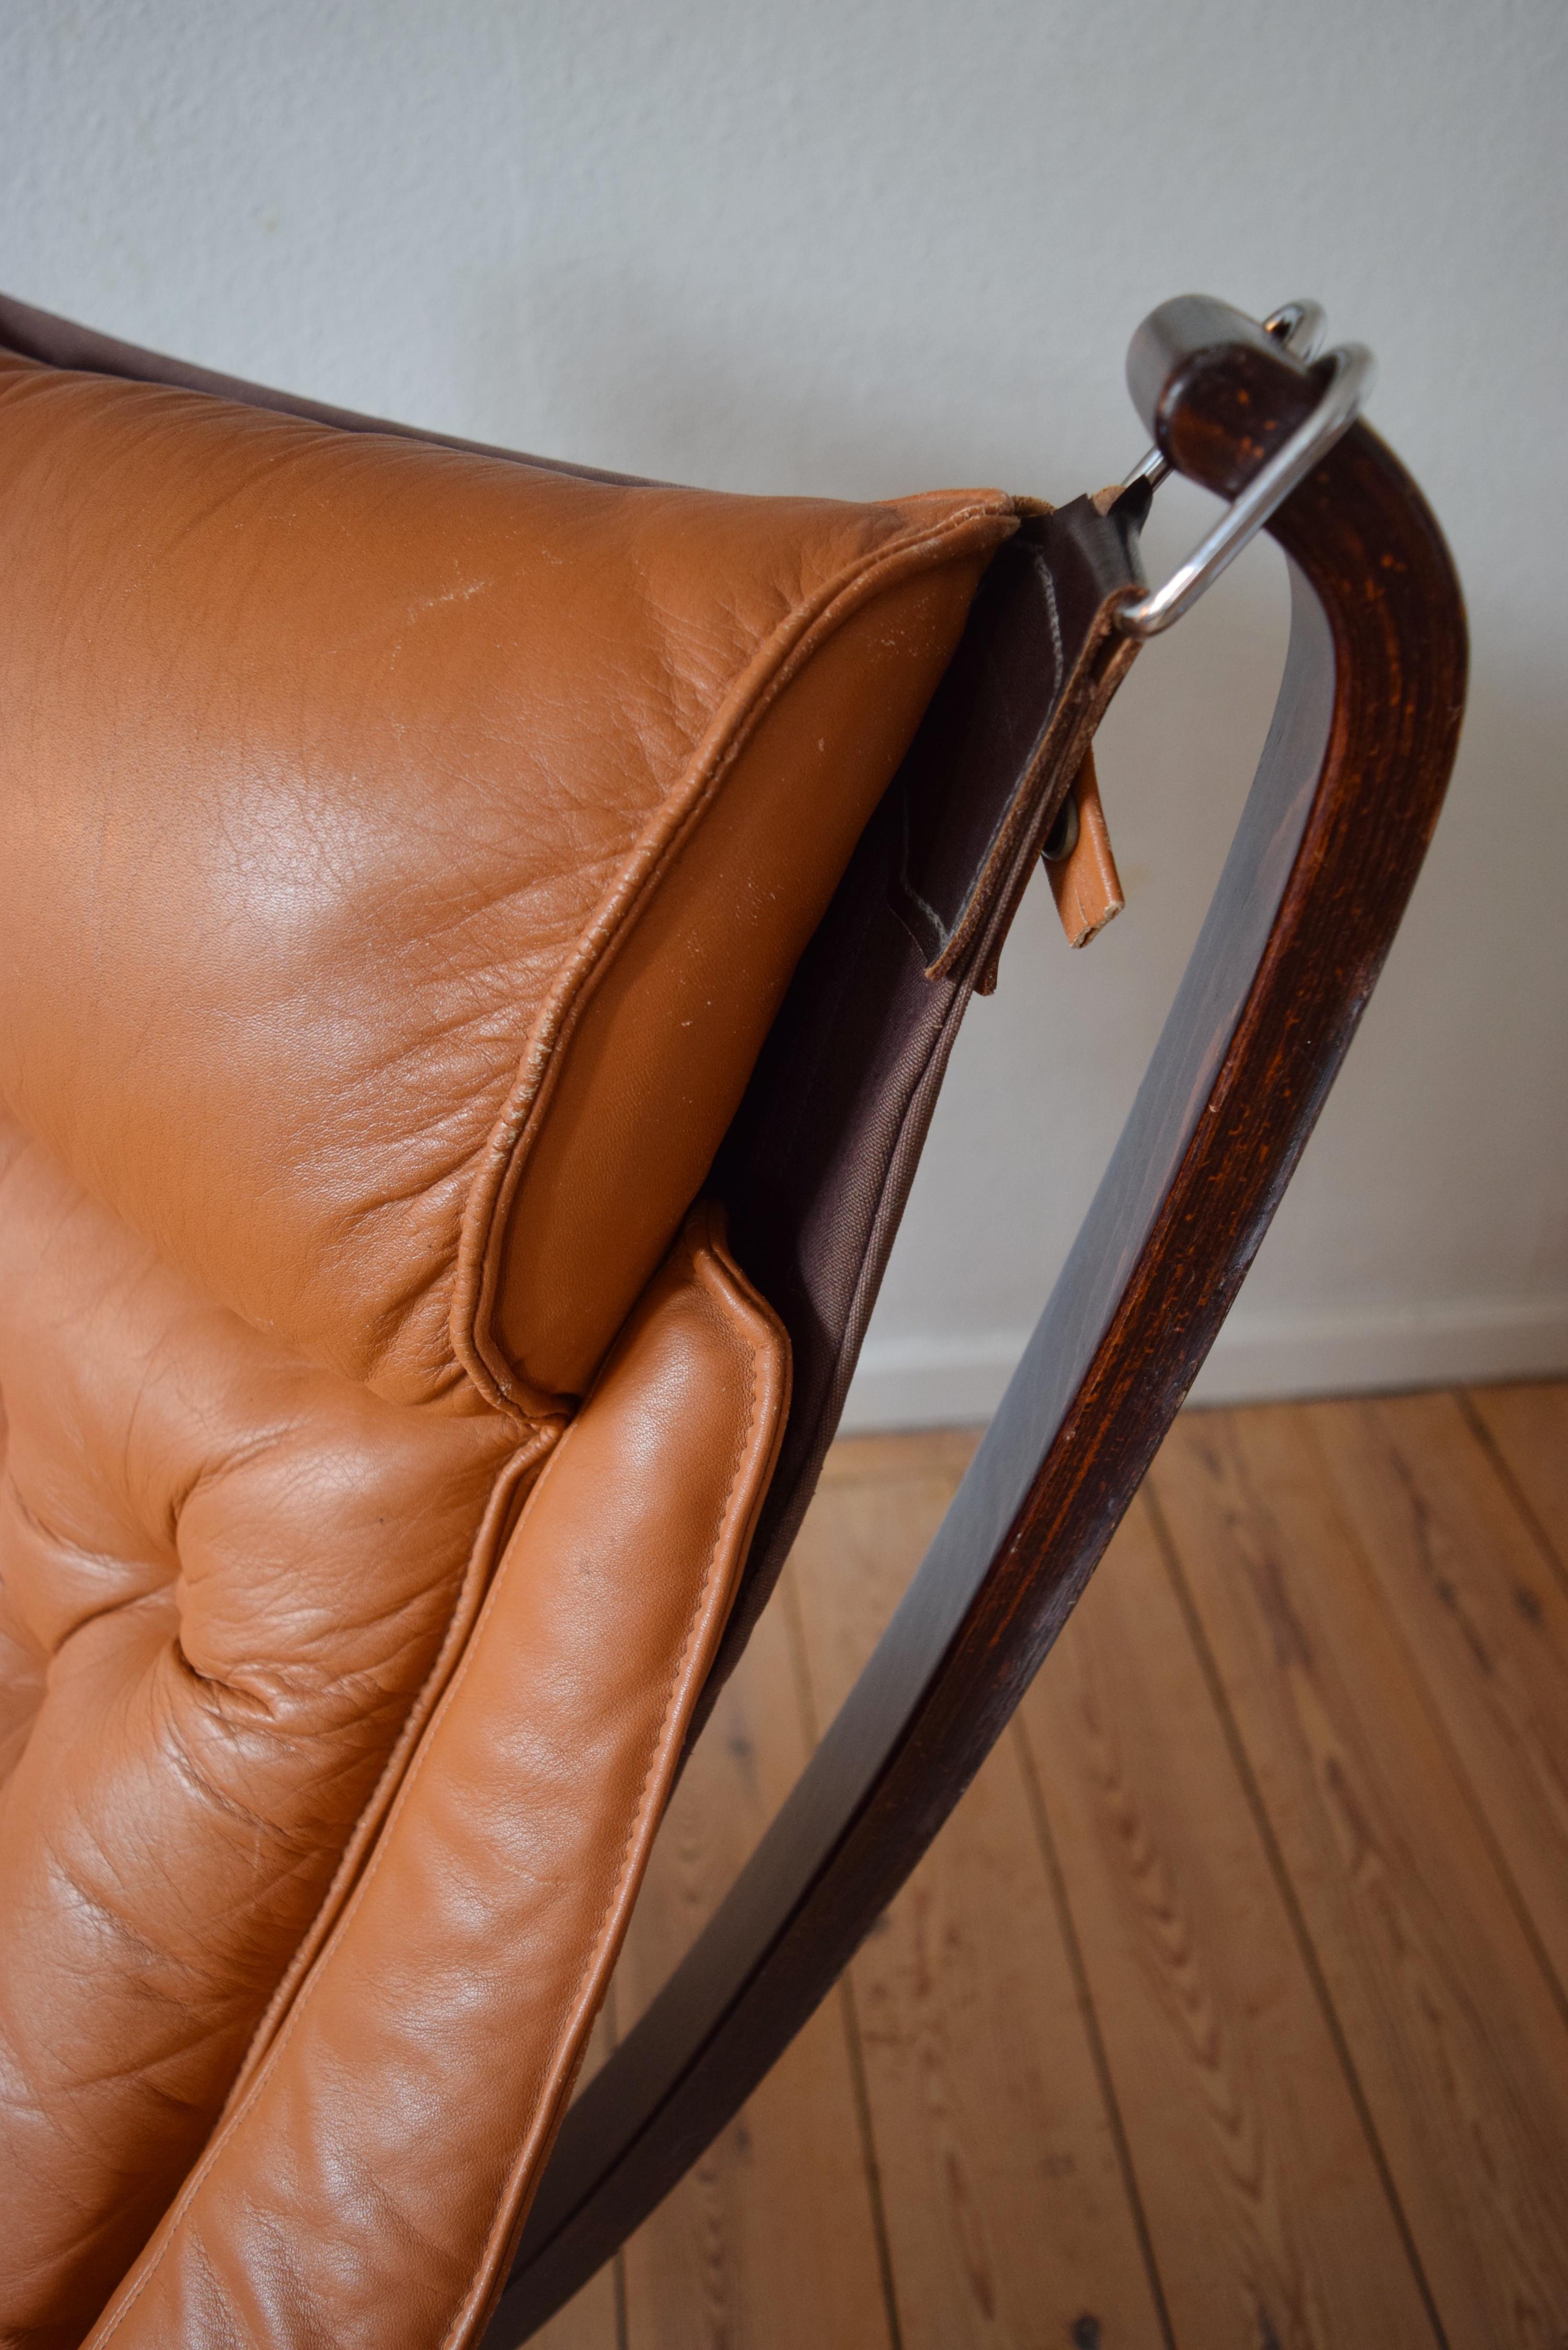 Winged falcon chair designed by Sigurd Ressel and manufactured by Vatne Møbler in Norway in the 1970s. Features cognac leather cushion and sits on a canvas hammock. The leather is in great shape and is still soft and supple. Stamped on the frame by